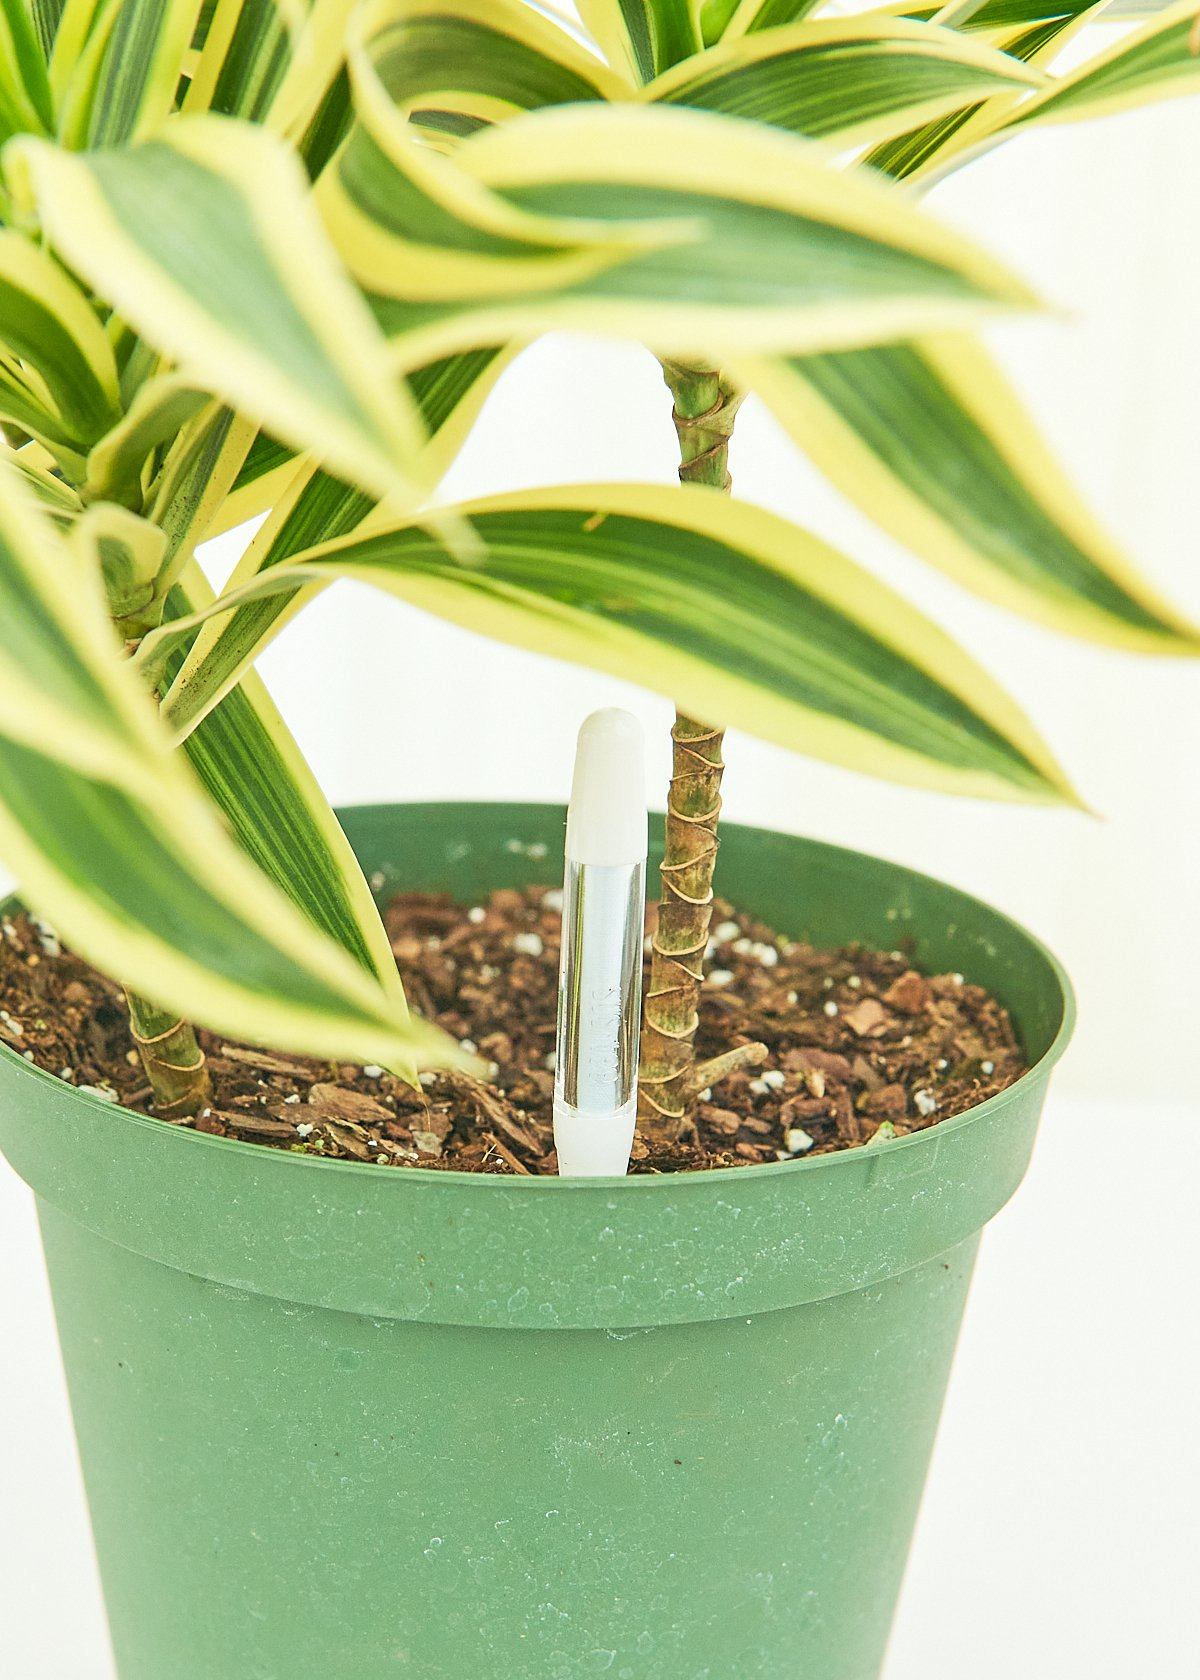 Small Moisture Meter in a mid view in a pot with a plant